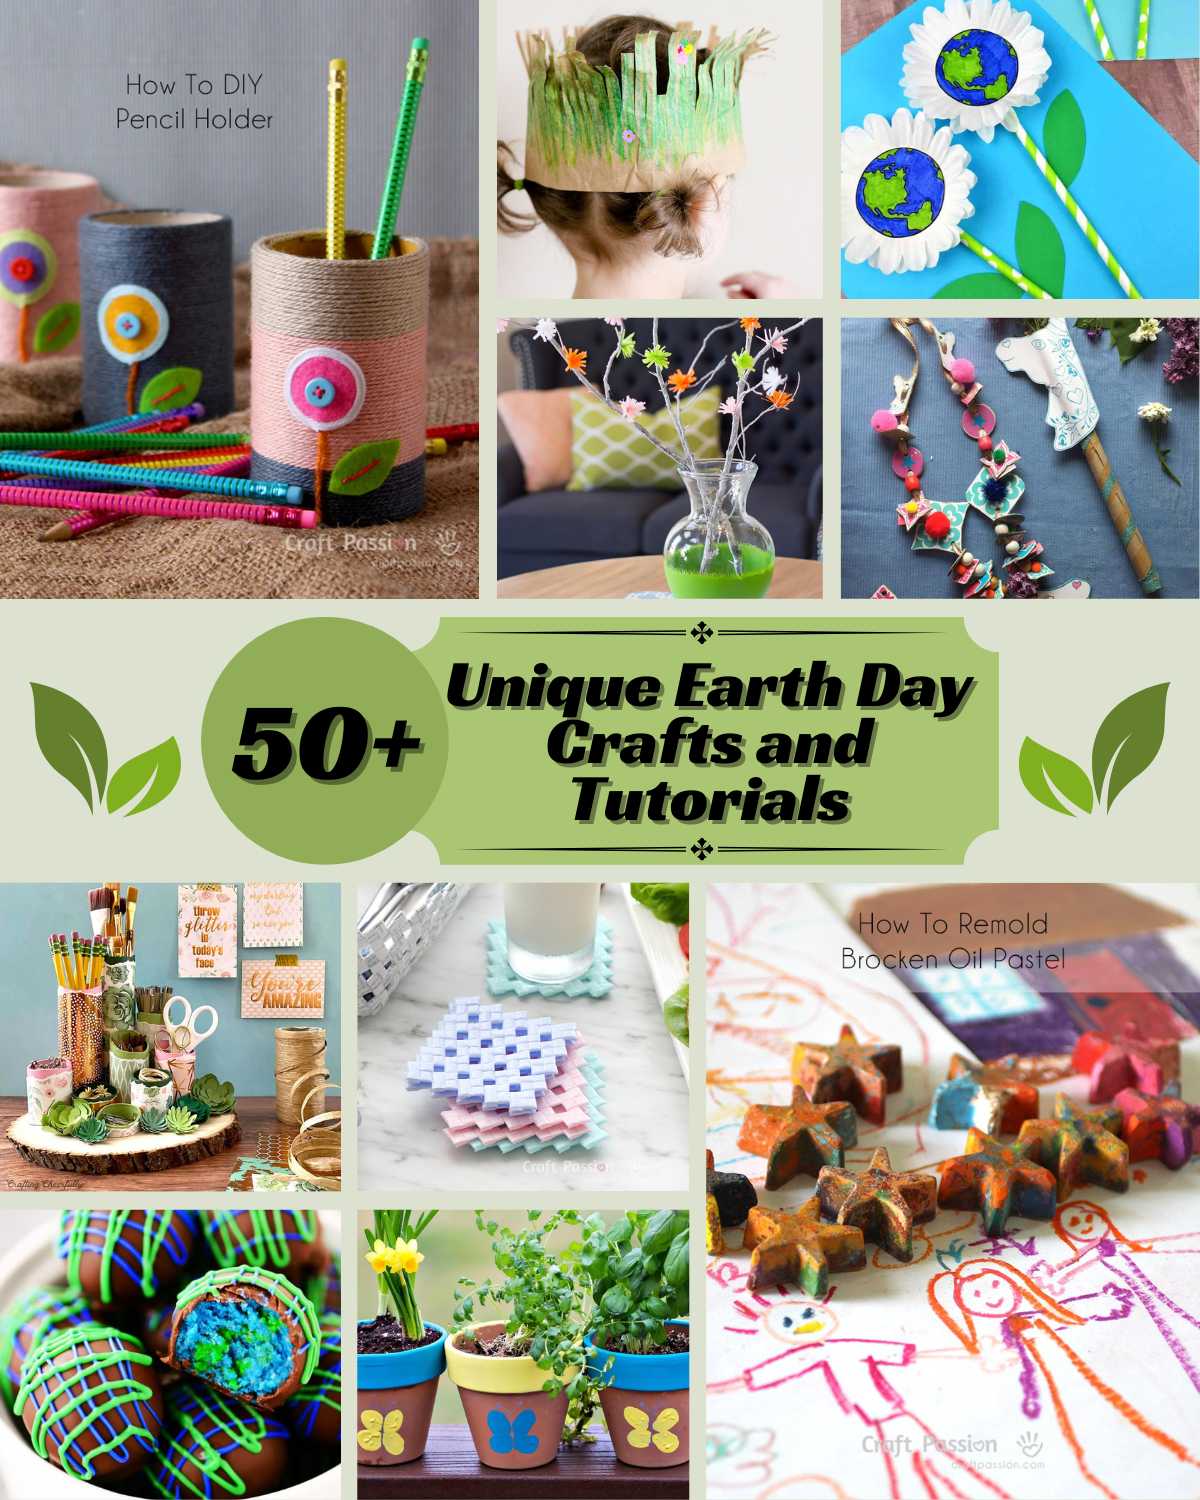 We have collected a list of art & crafts for Earth Day that teach kids of all ages about being responsible to the environment and the future, from projects using recycled materials to ones that are inspired by nature.